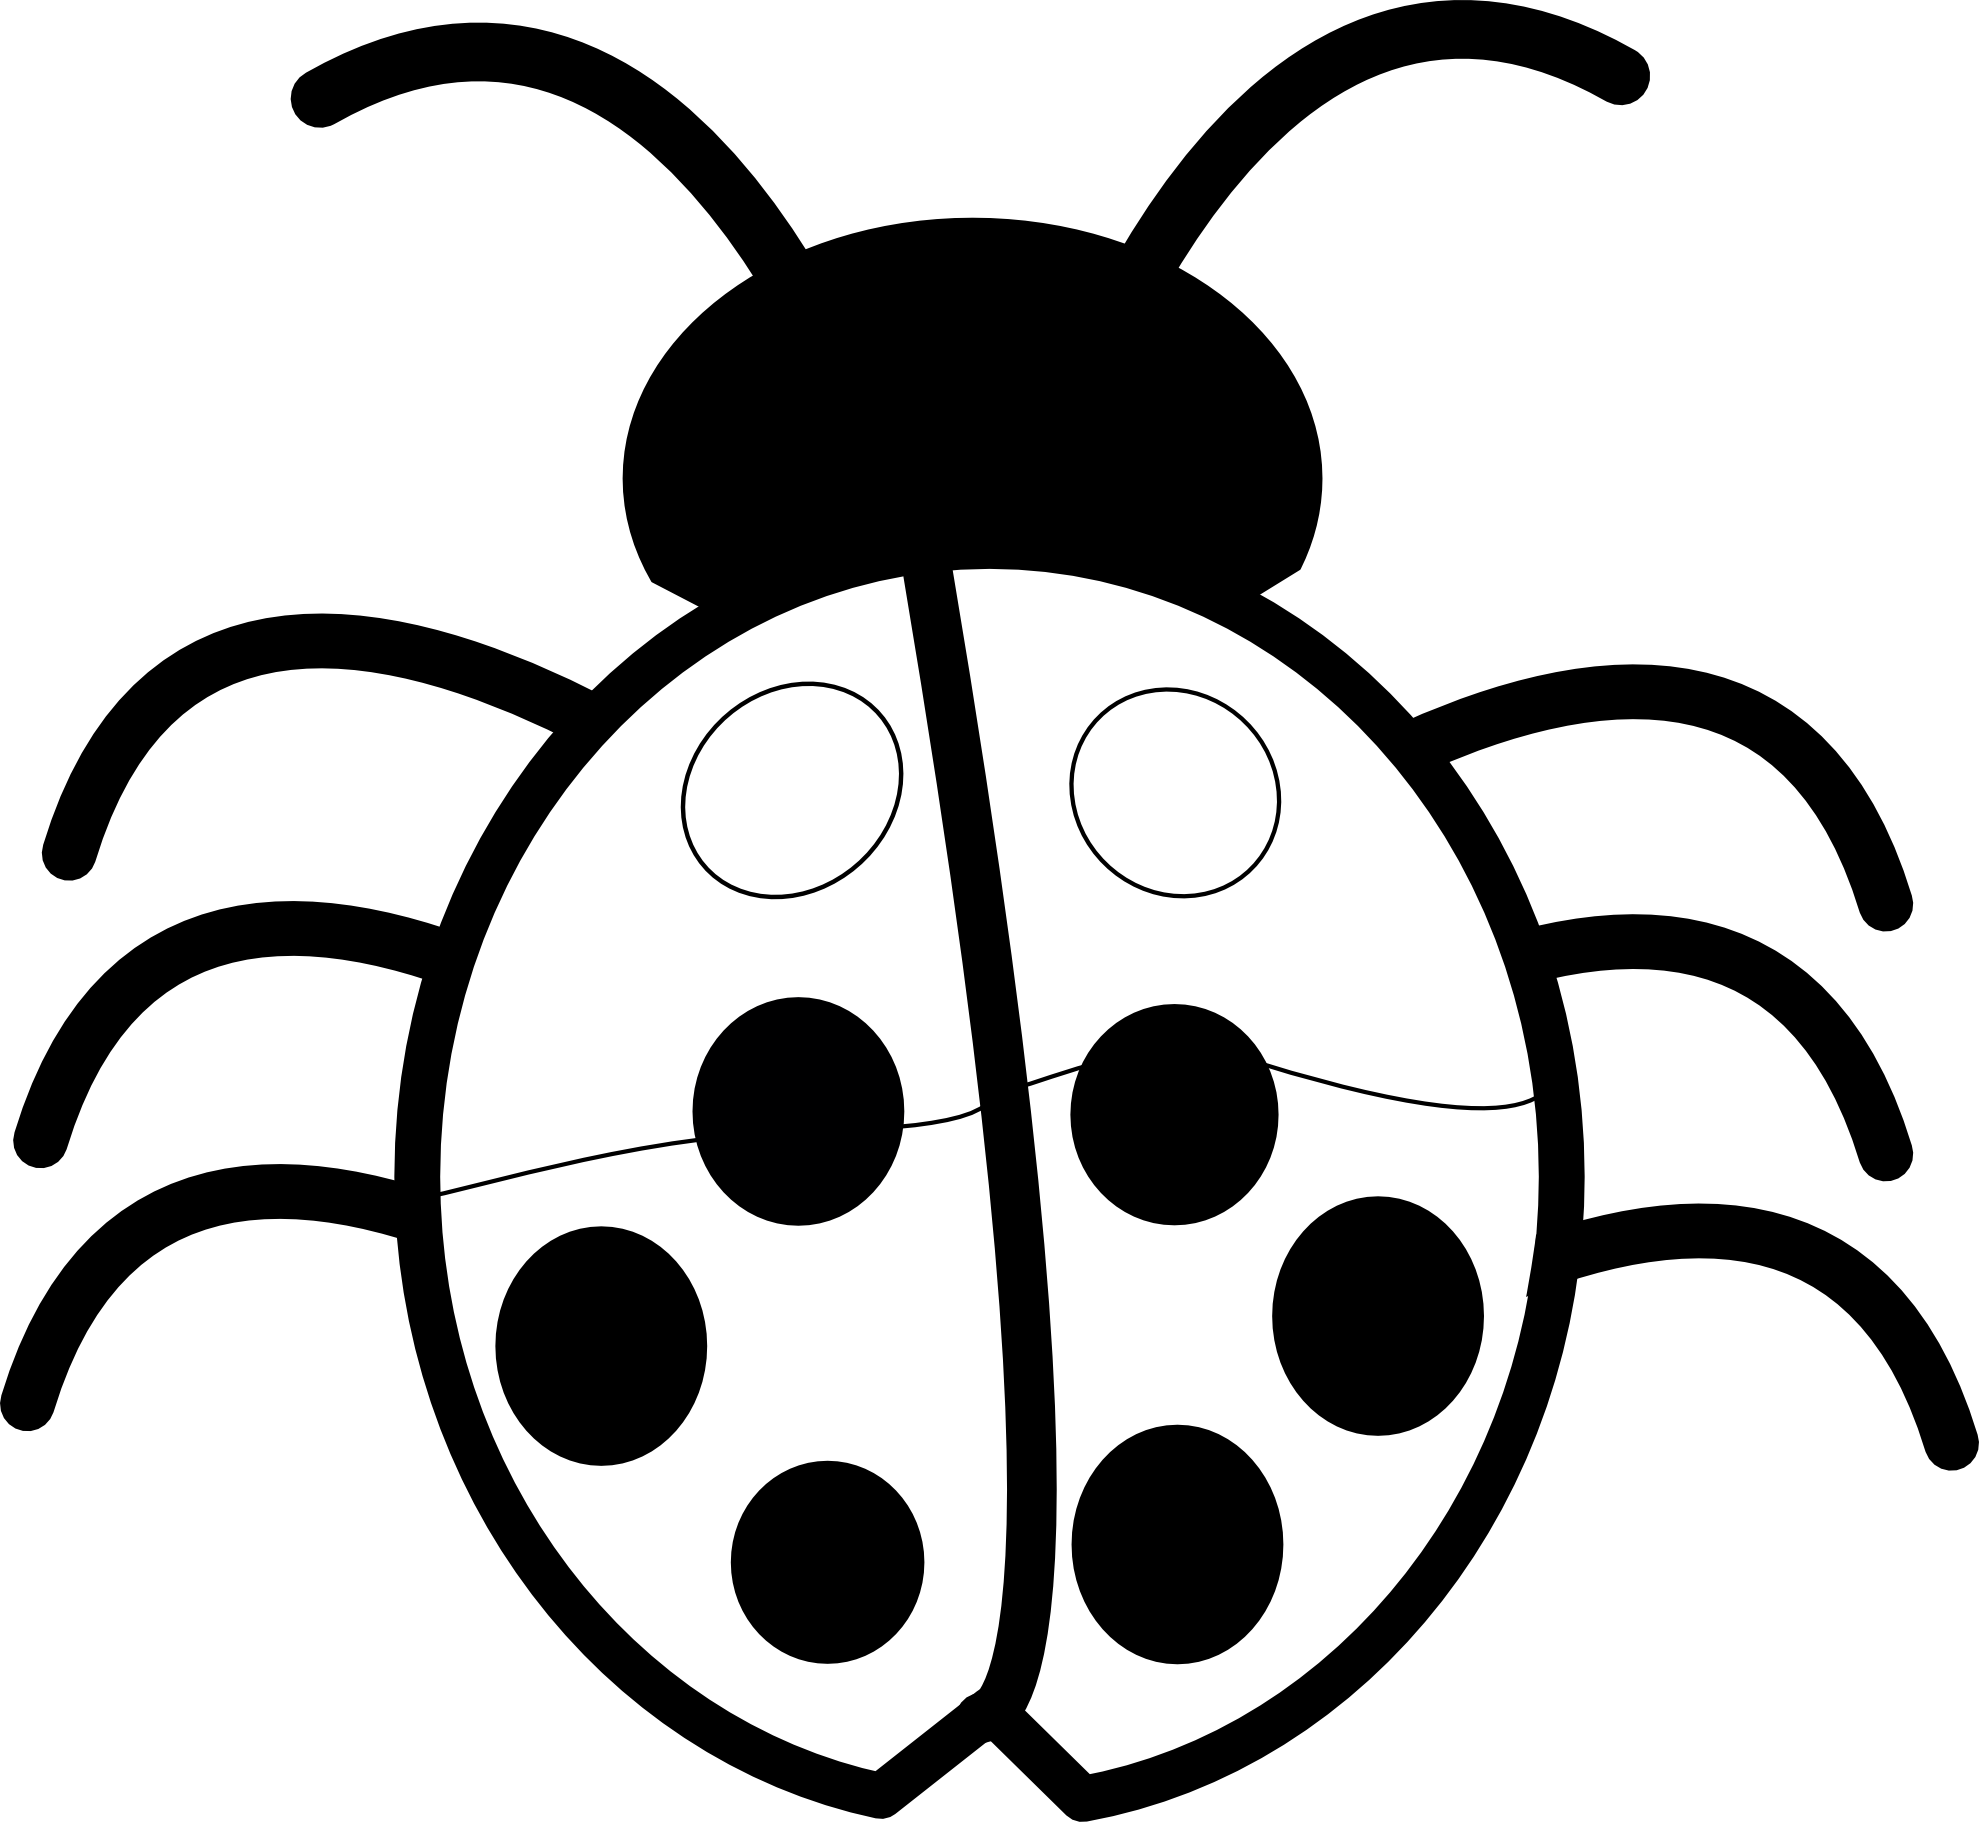 Ladybug Clipart Black And White | Clipart library - Free Clipart Images